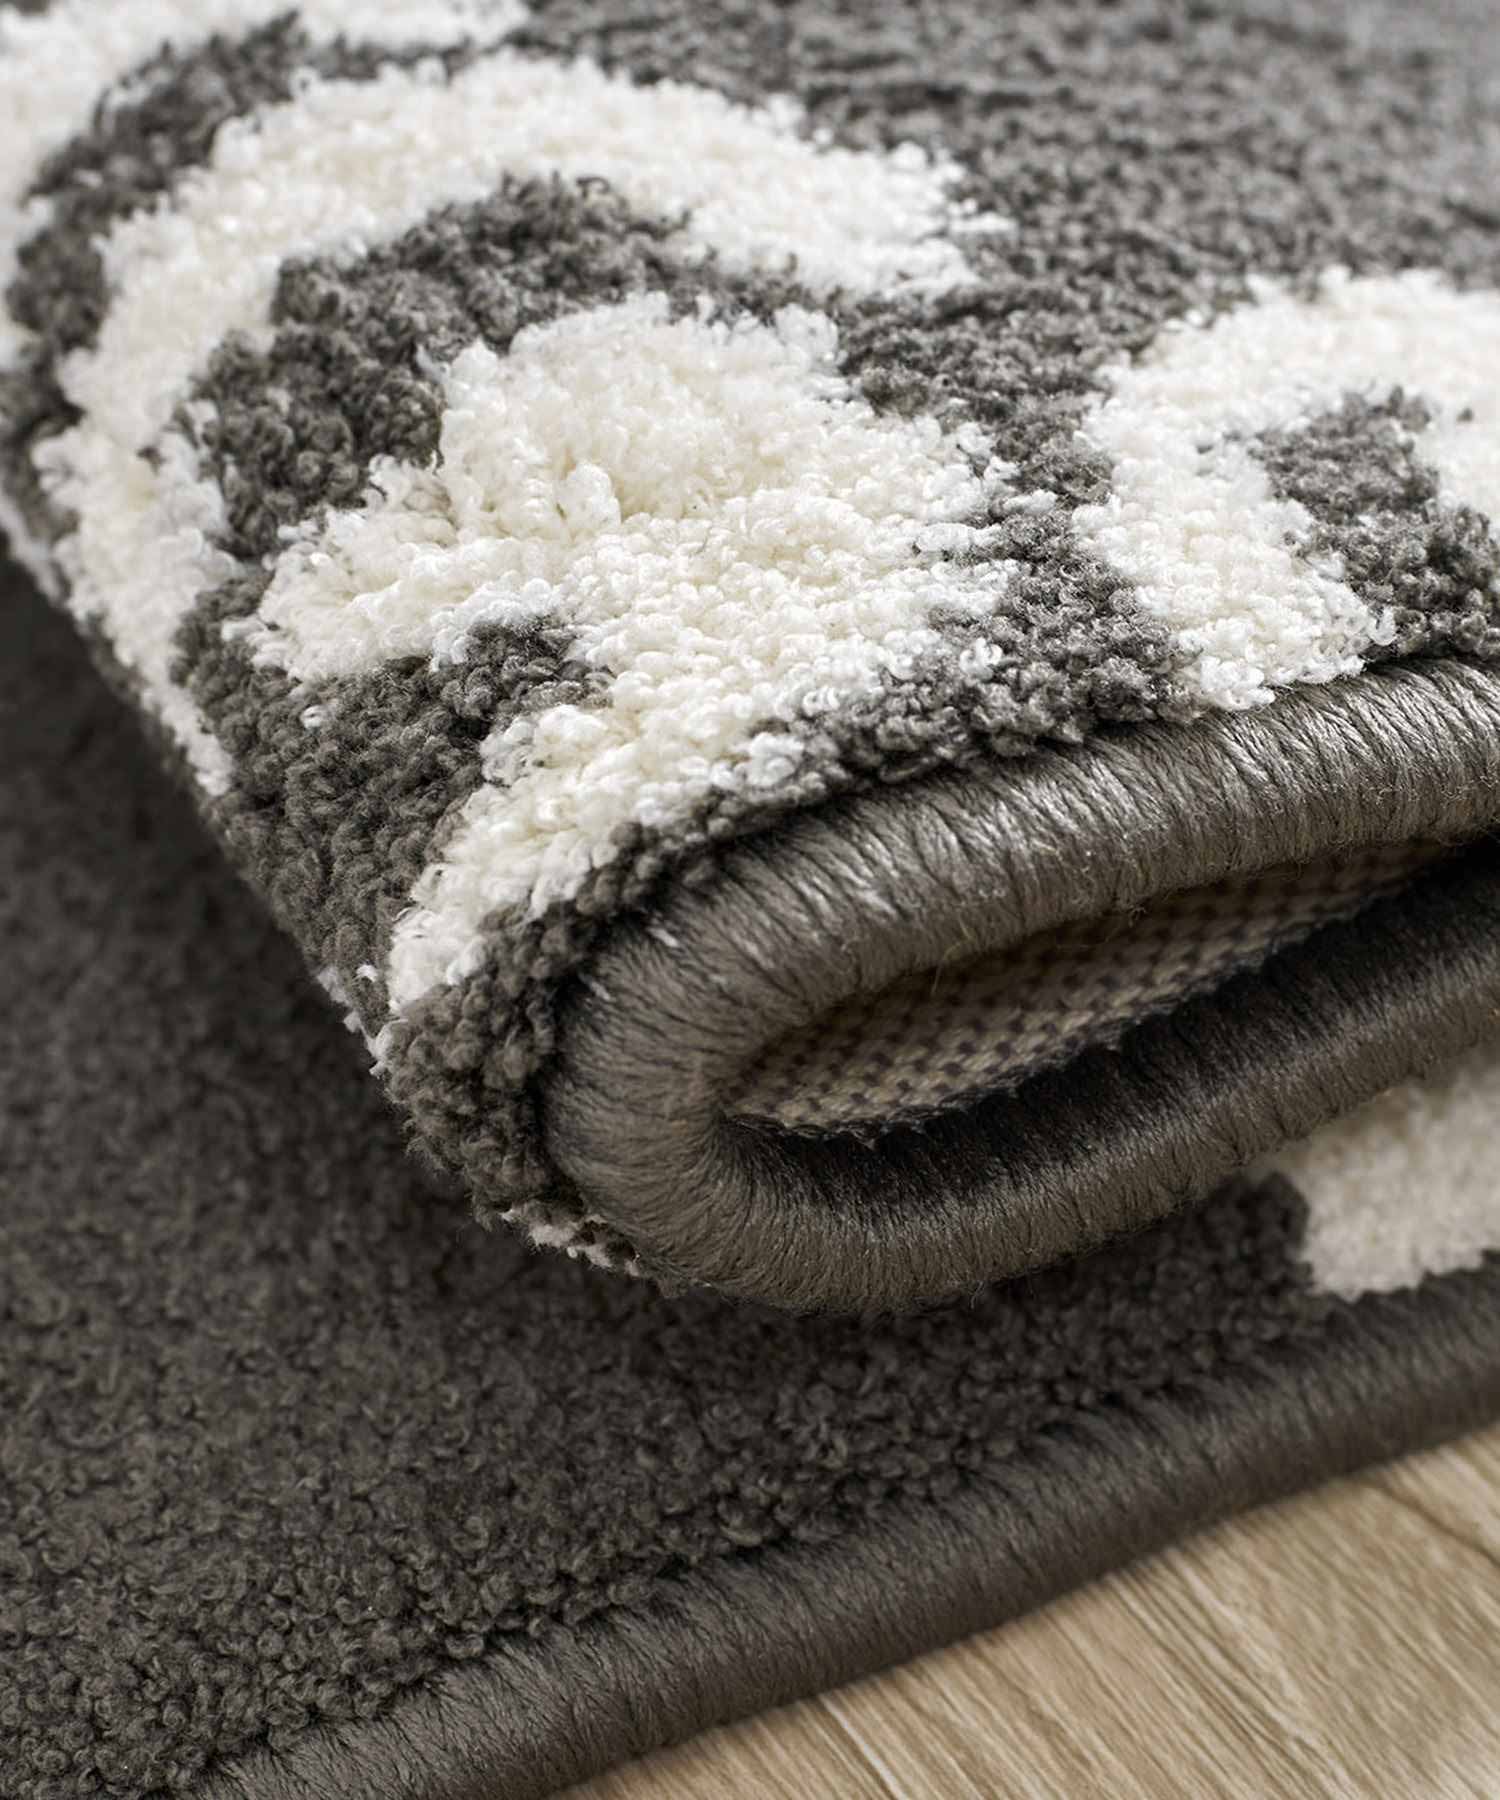 Soft&Plush Area Rugs 1.2 M X 1.8 M, 3155 GSM, Carvin Damask